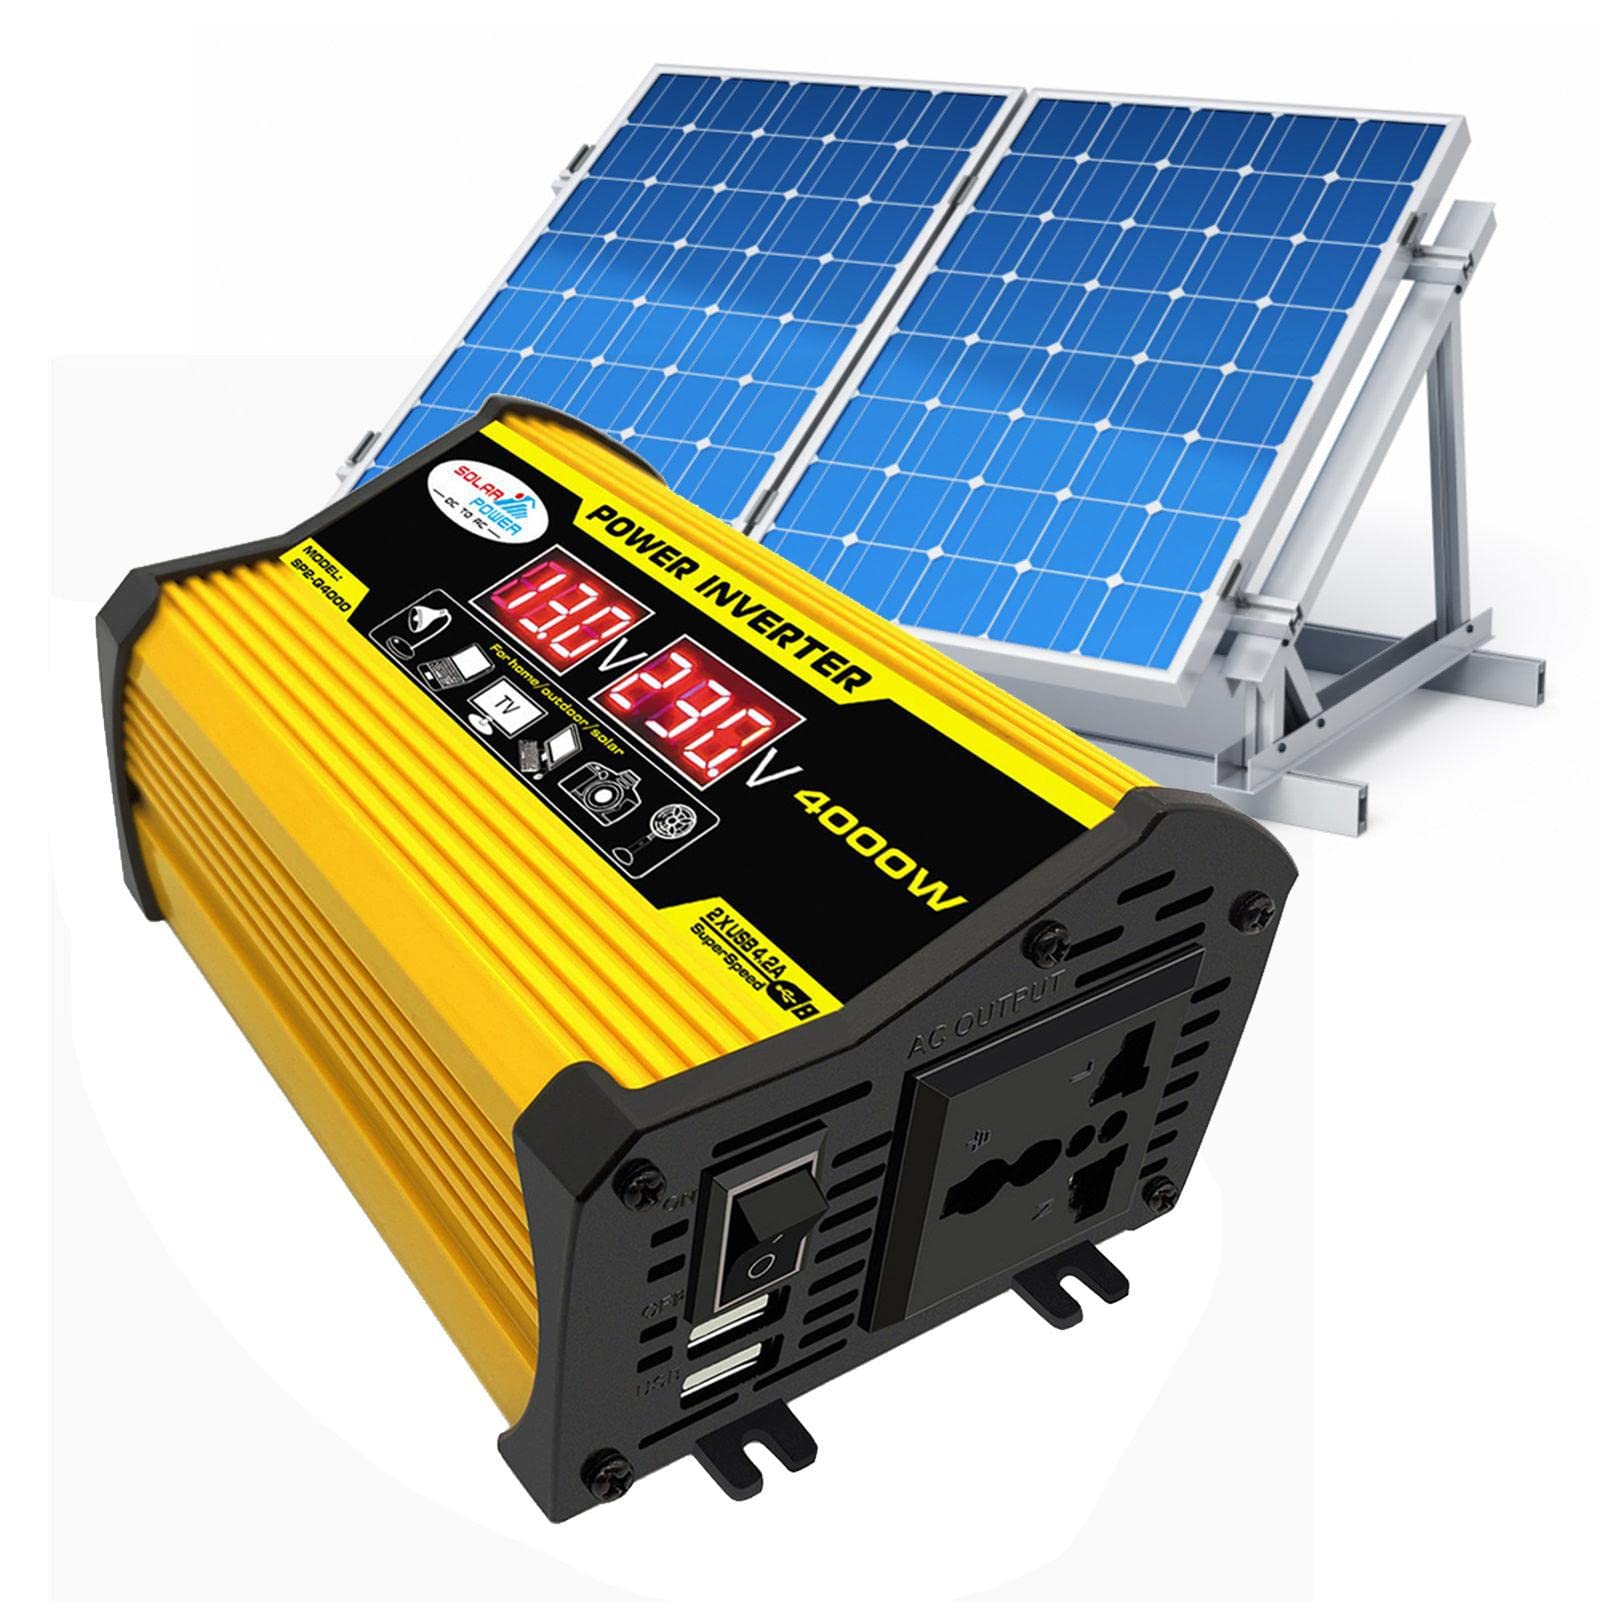 Hulzogul Solar System, Portable Solar Panel Kit, 4000W Inverter with 2 USB Ports, 30A Solar Charge Controller, LED Screen Display, Fast Charging for Critical Supply